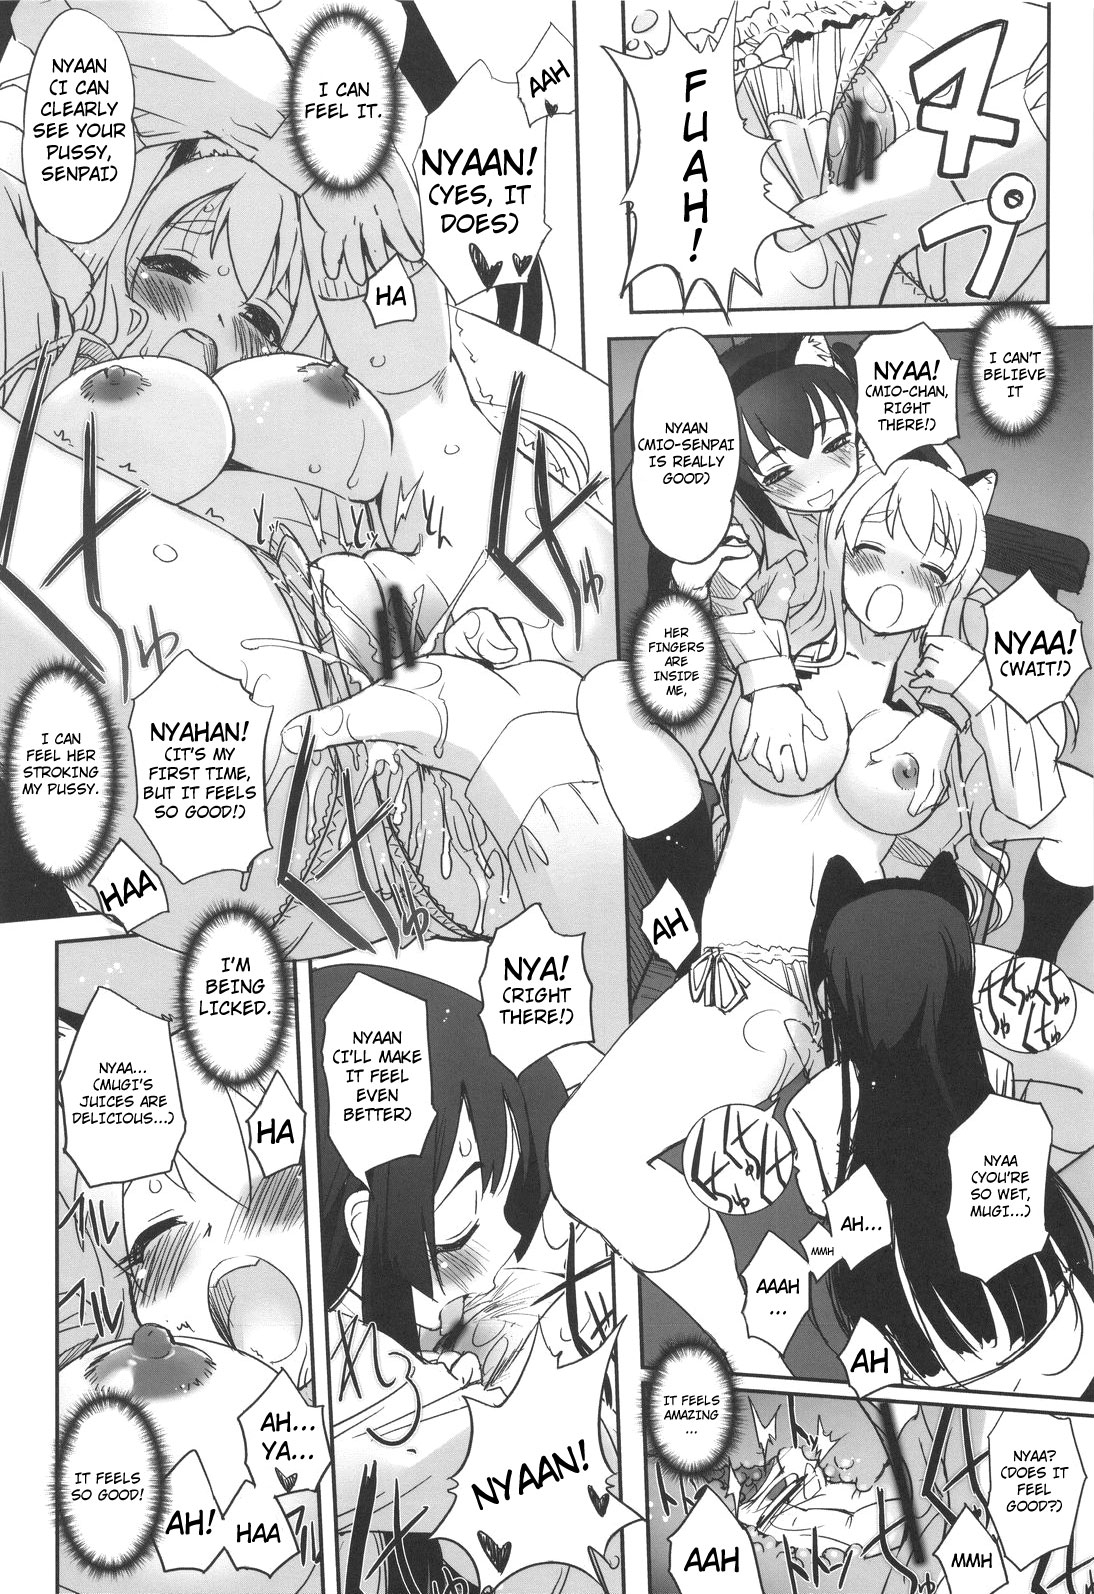 (C76) [G-Power! (Sasayuki)] Nekomimi to Toilet to Houkago no Bushitsu | Cat Ears And A Restroom And The Club Room After School (K-ON) [English] [Nicchiscans-4Dawgz] 20